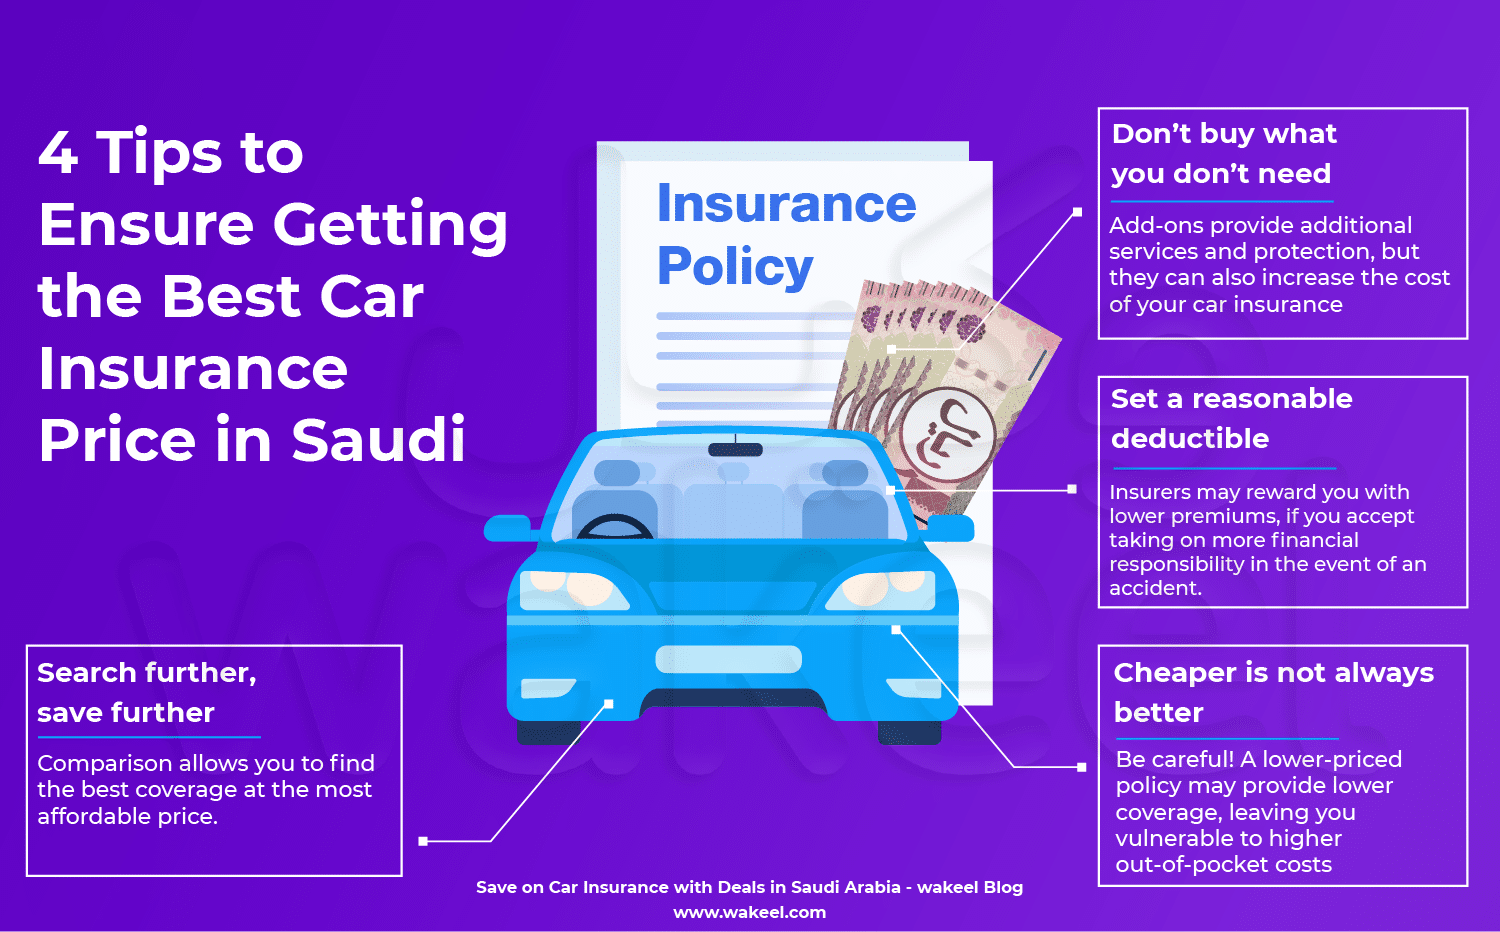 An infographic showing four tips for getting the best car insurance prices in Saudi Arabia. The tips are to compare quotes, set a reasonable deductible, avoid unnecessary add-ons, and building up Najm's No-claim discount.